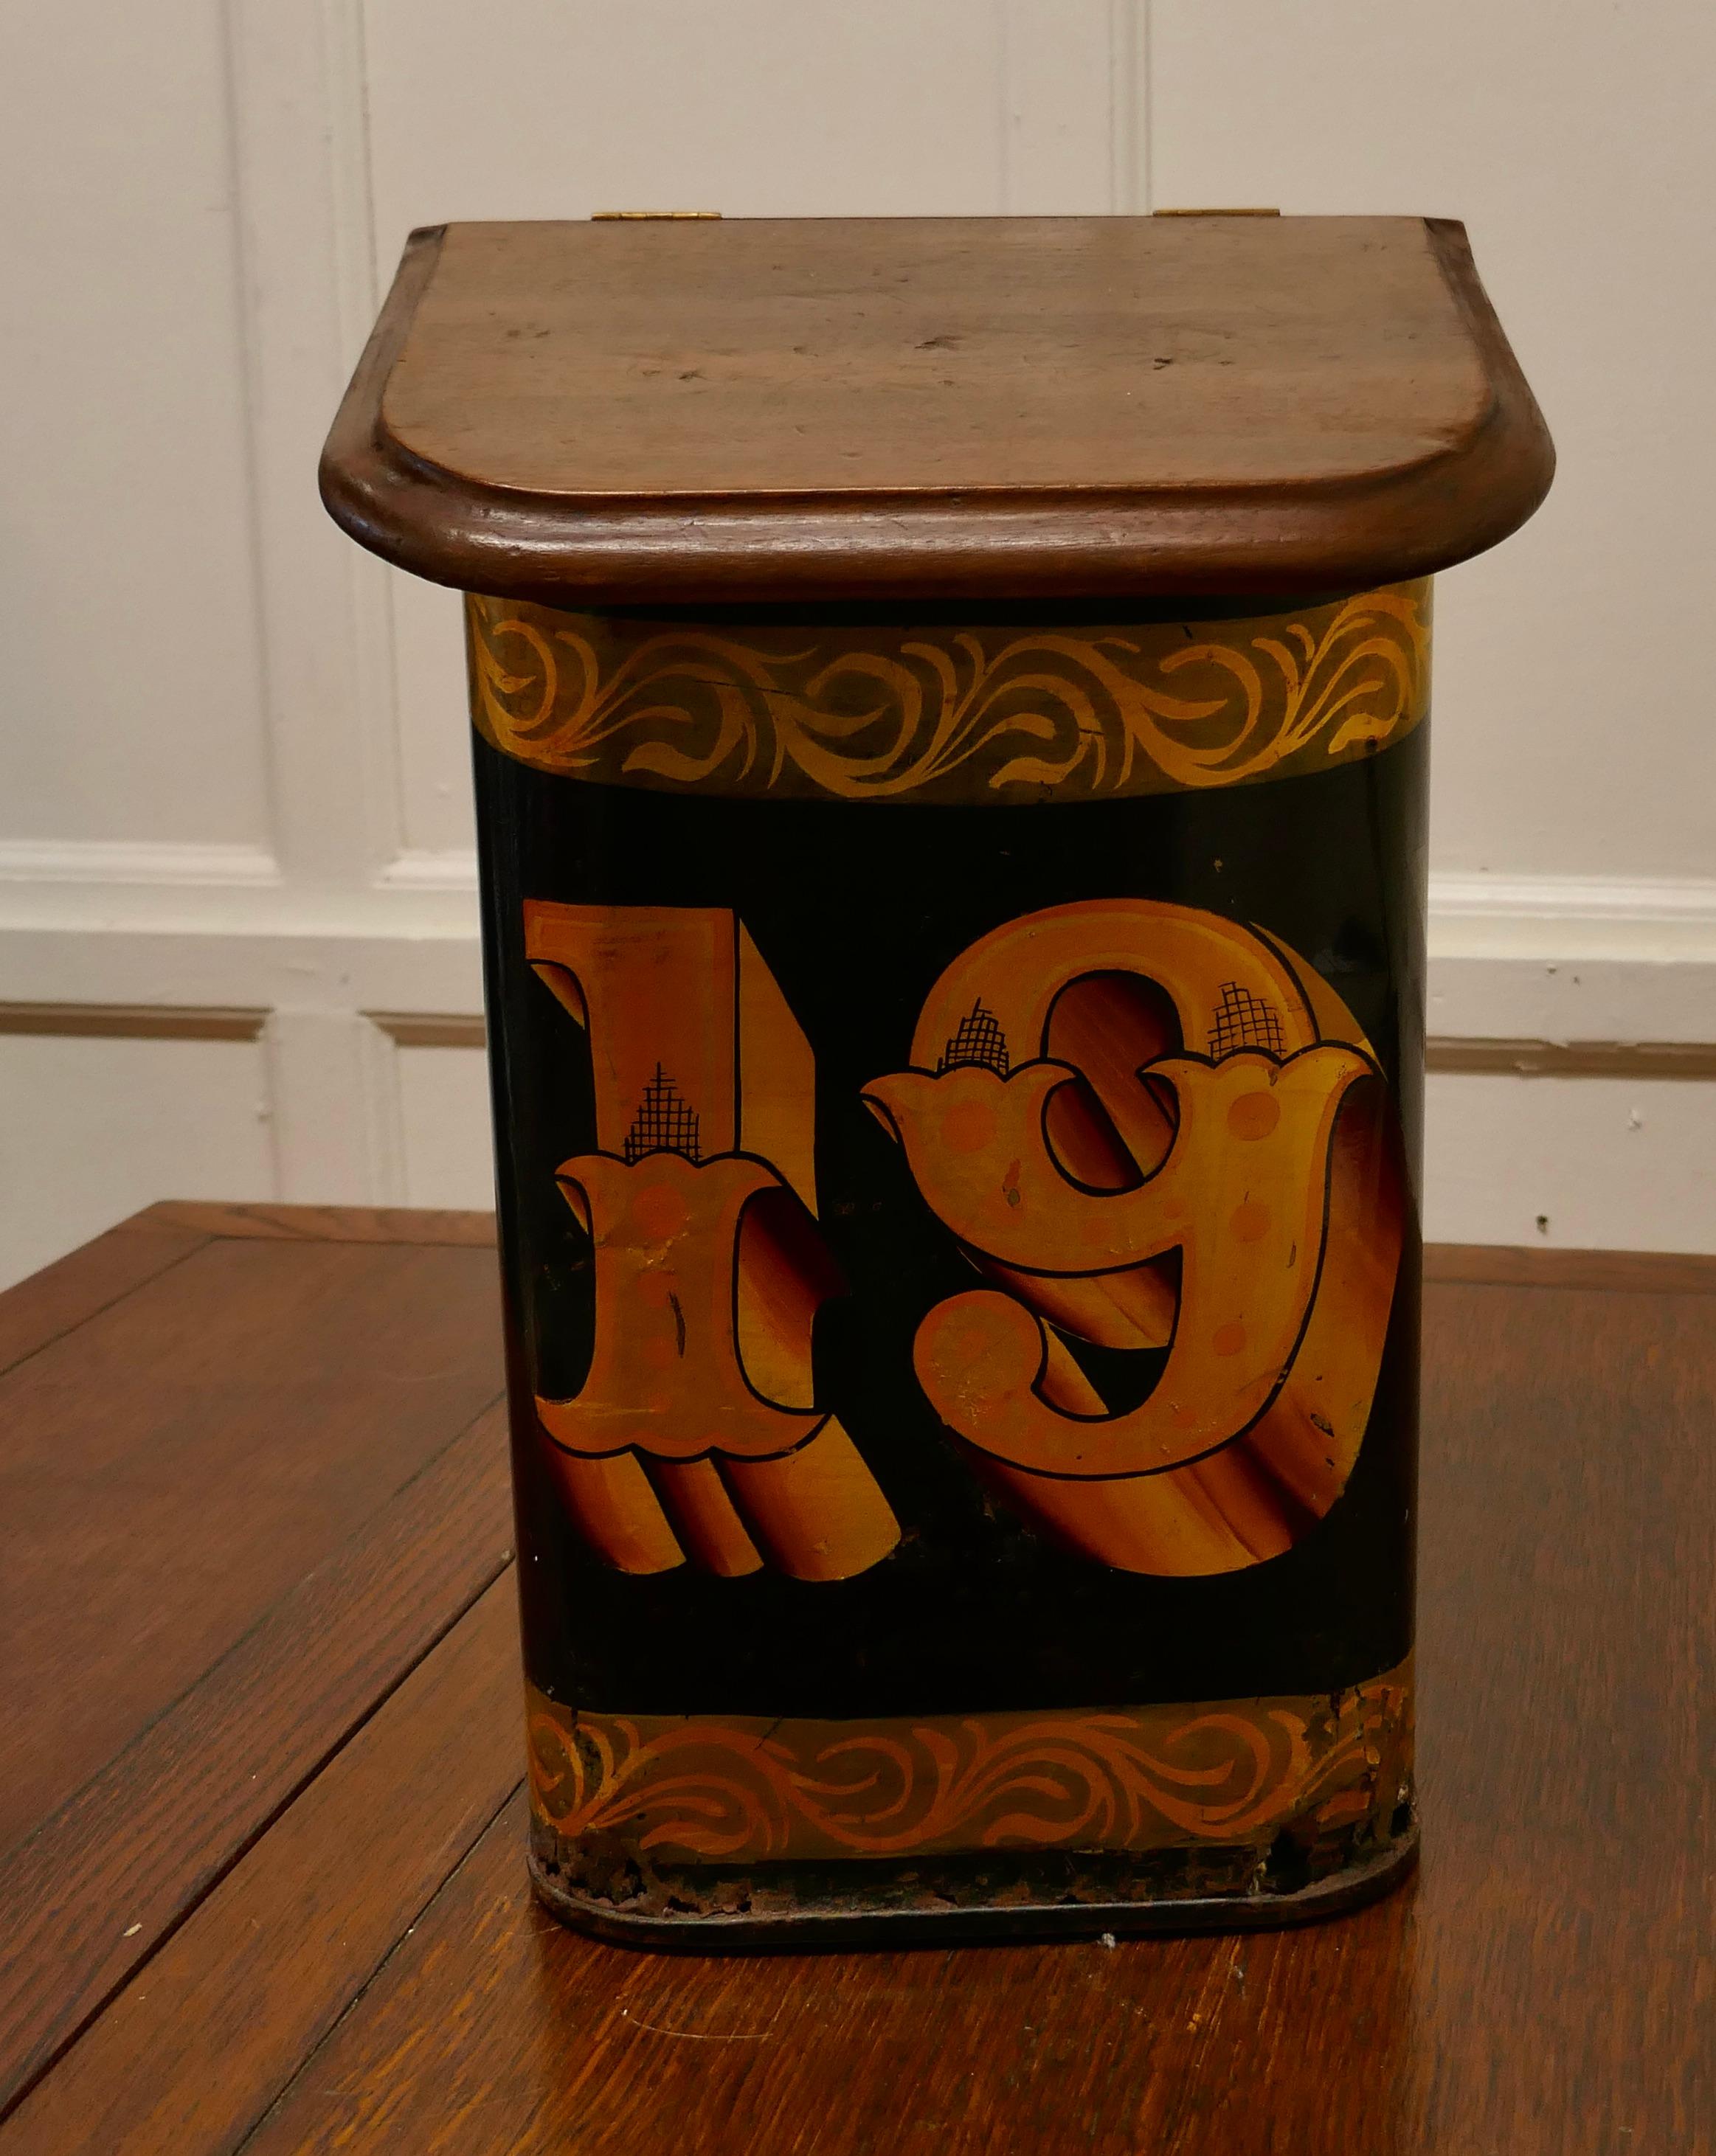 19th century toleware grocer’s shop tea tin,


A beautiful decorative Grocers Tea Canister, it would have been filled with Tea for sale, it has a very attractive style. The lid is made in wood, it has TEA carved on it and the hinged top is sloped